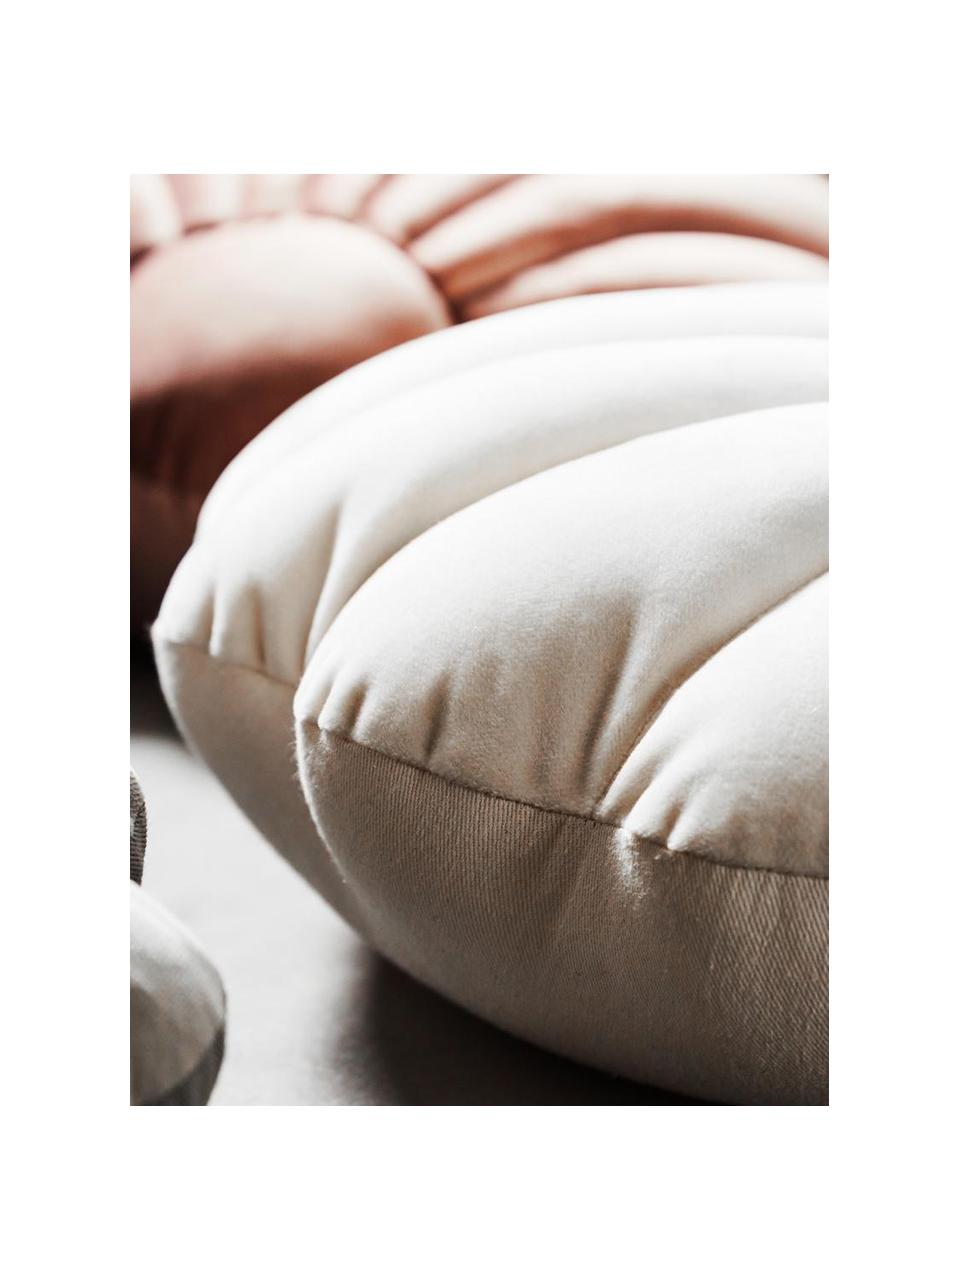 Grand coussin coquillage velours cream